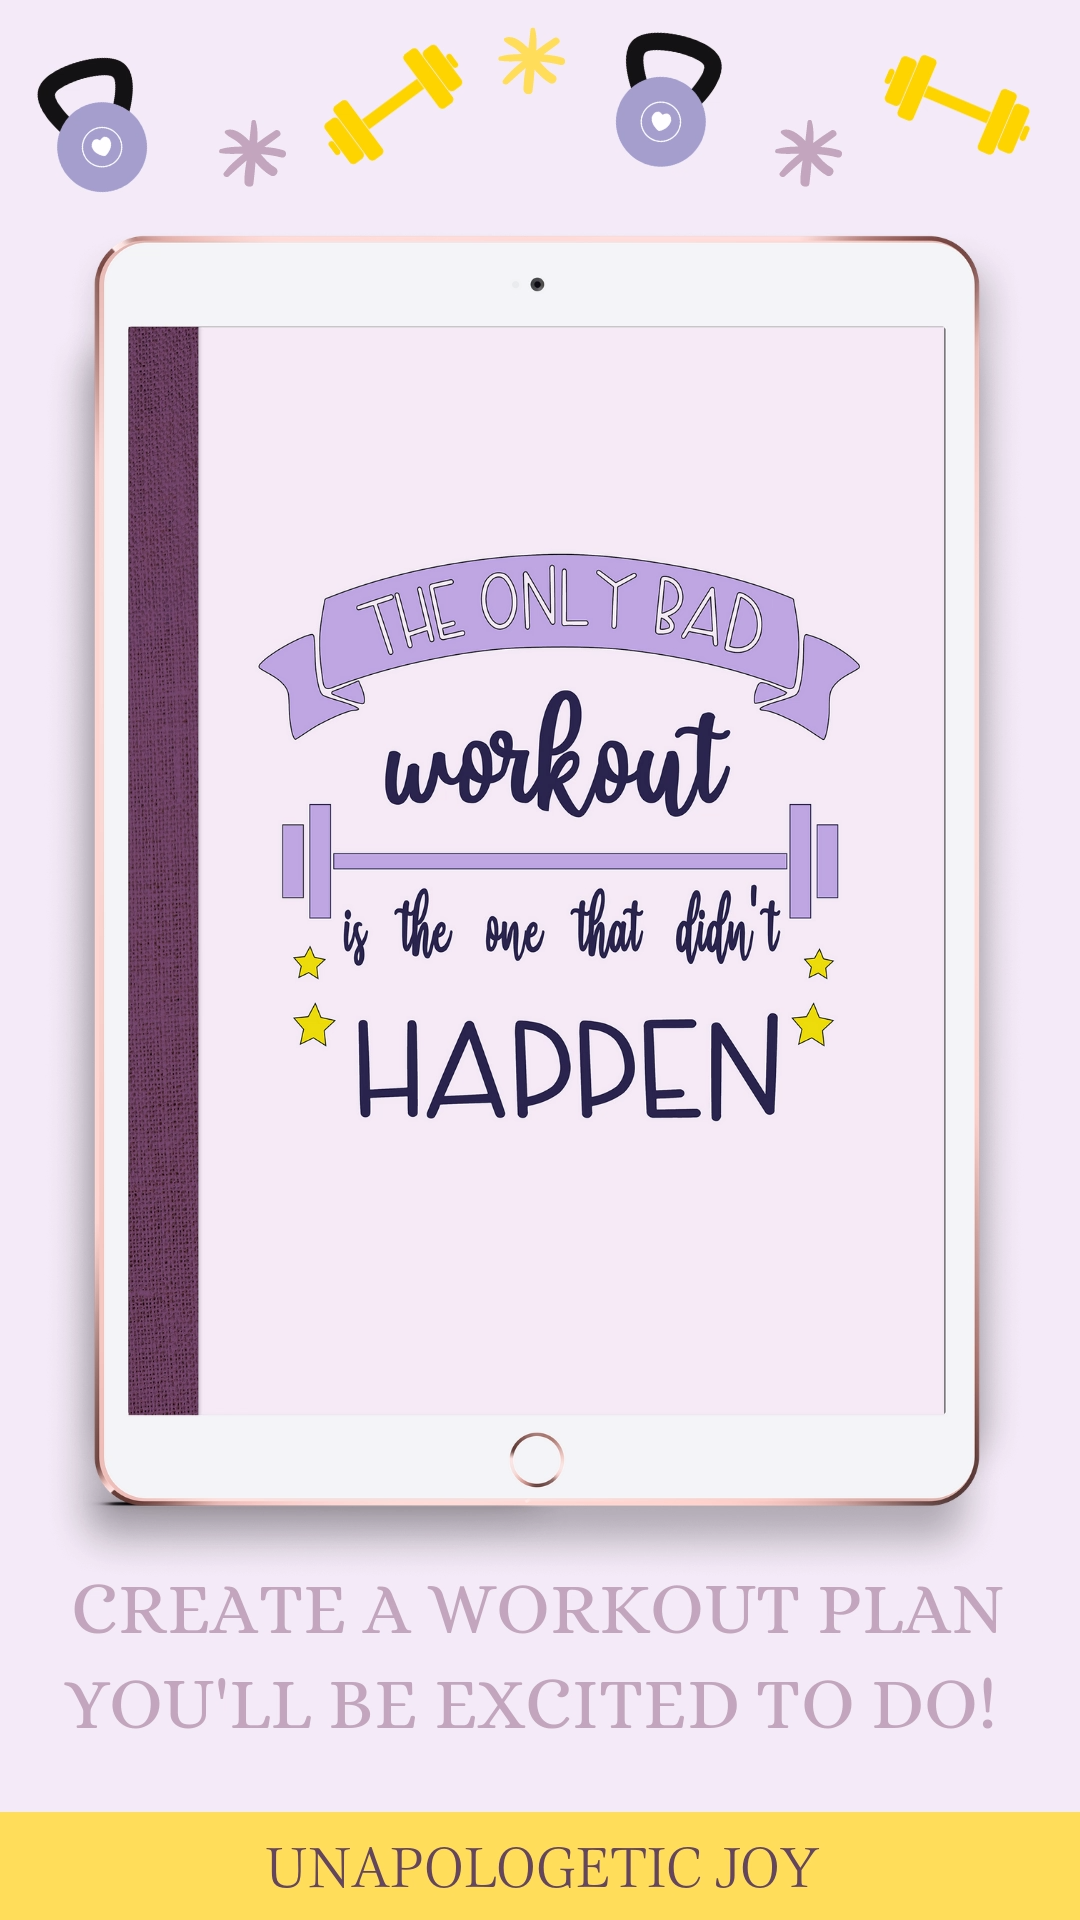 No Bad Workout Digital Fitness Planner -   17 fitness Journal exercise ideas